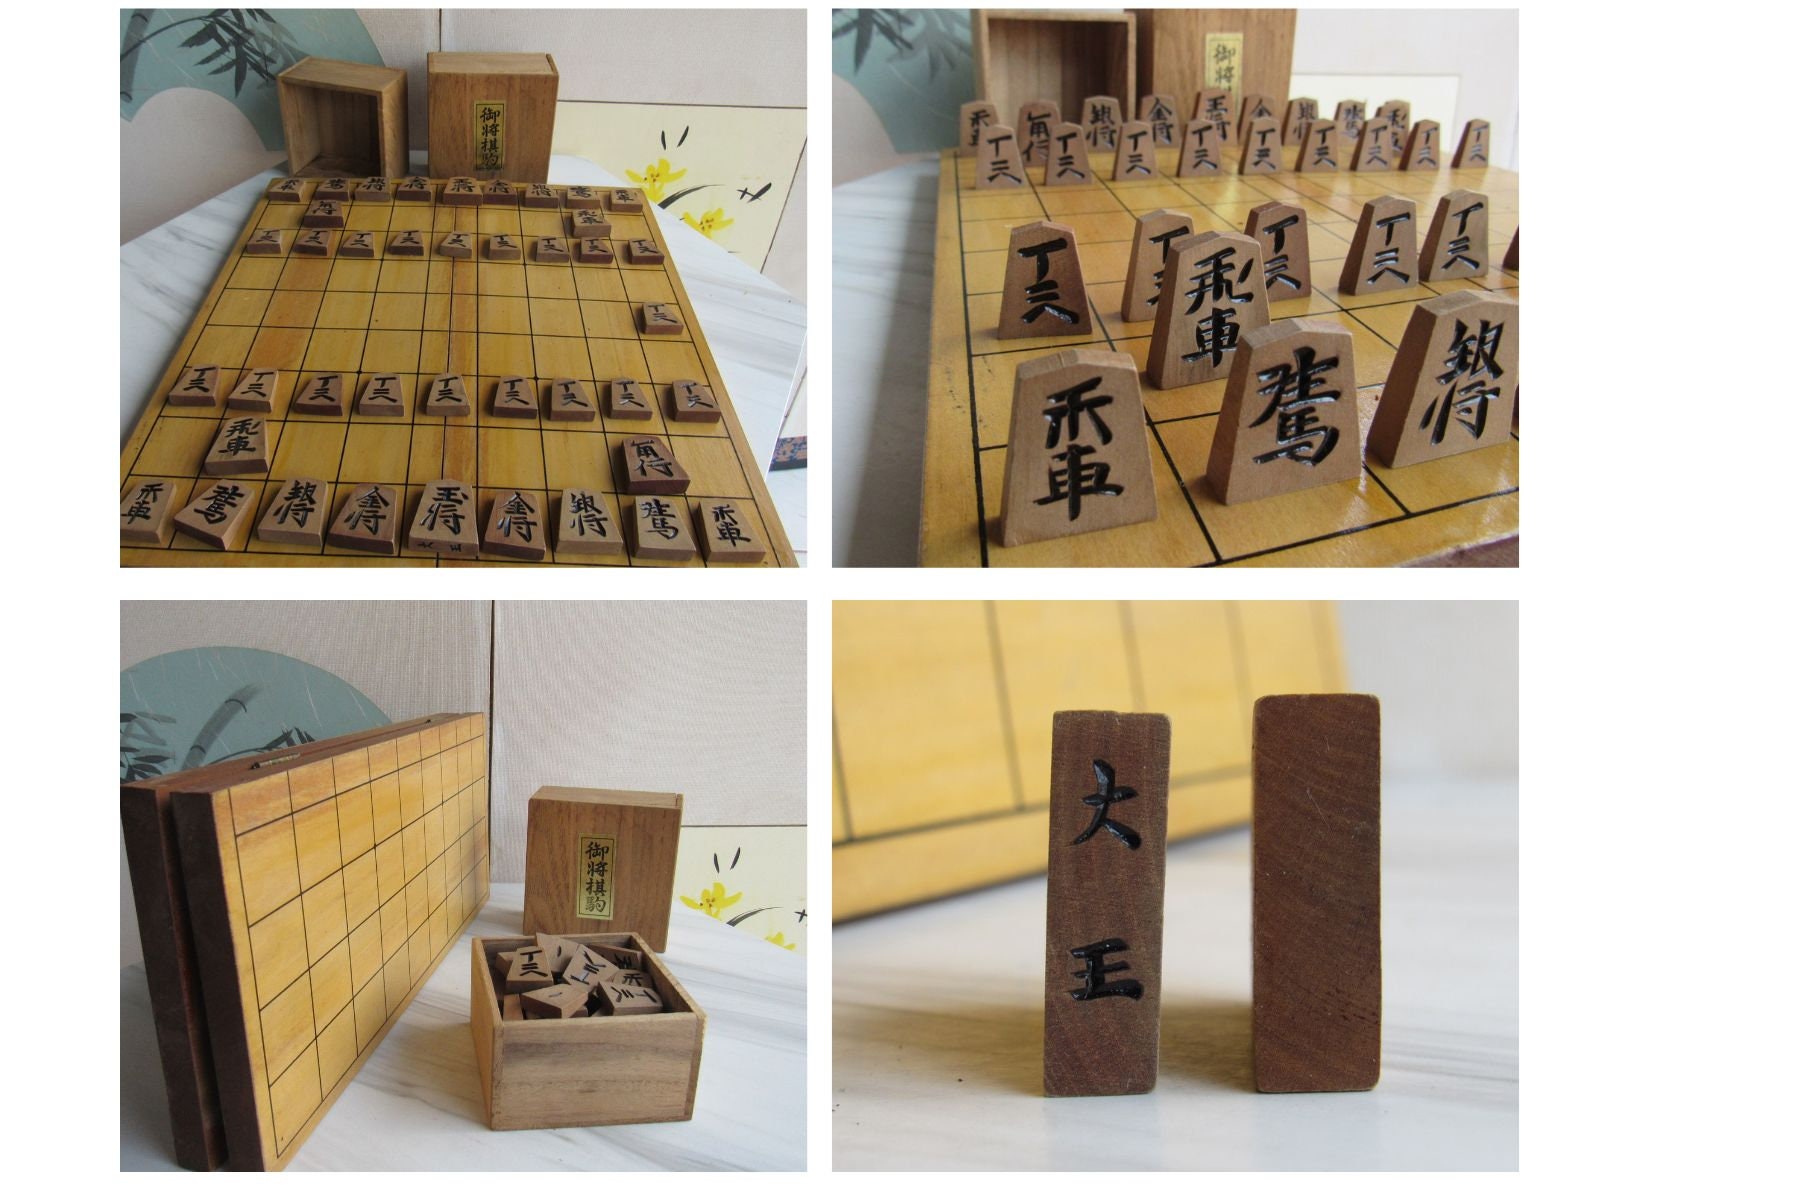 Shogi Shogi Board Wooden with feet Thickness approx. 11cm